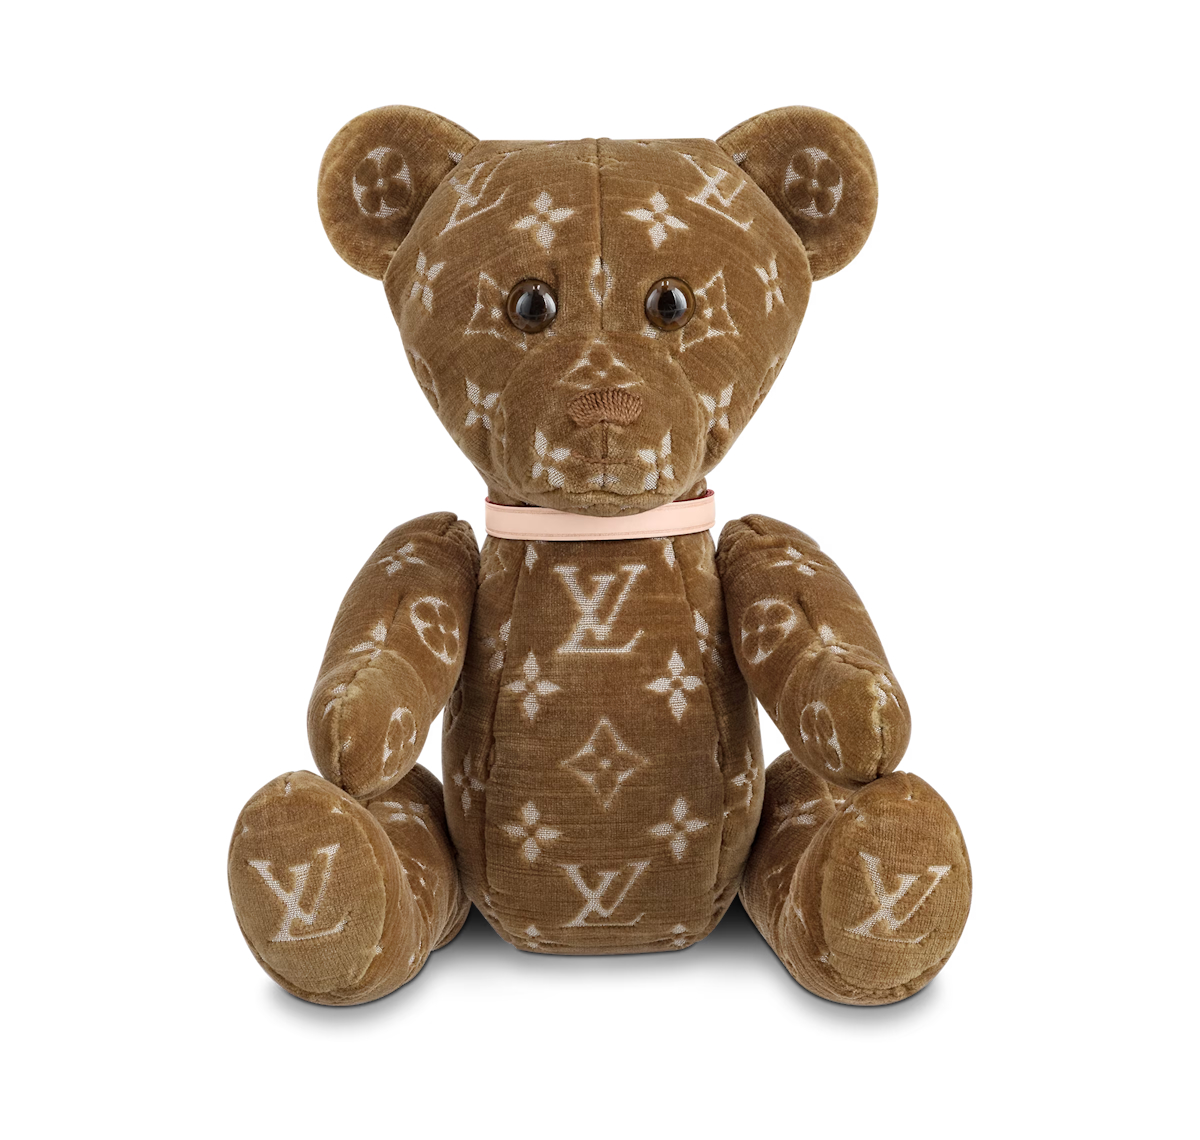 10 Objects to Desire From Louis Vuitton's 2023 Holiday Gift Guide